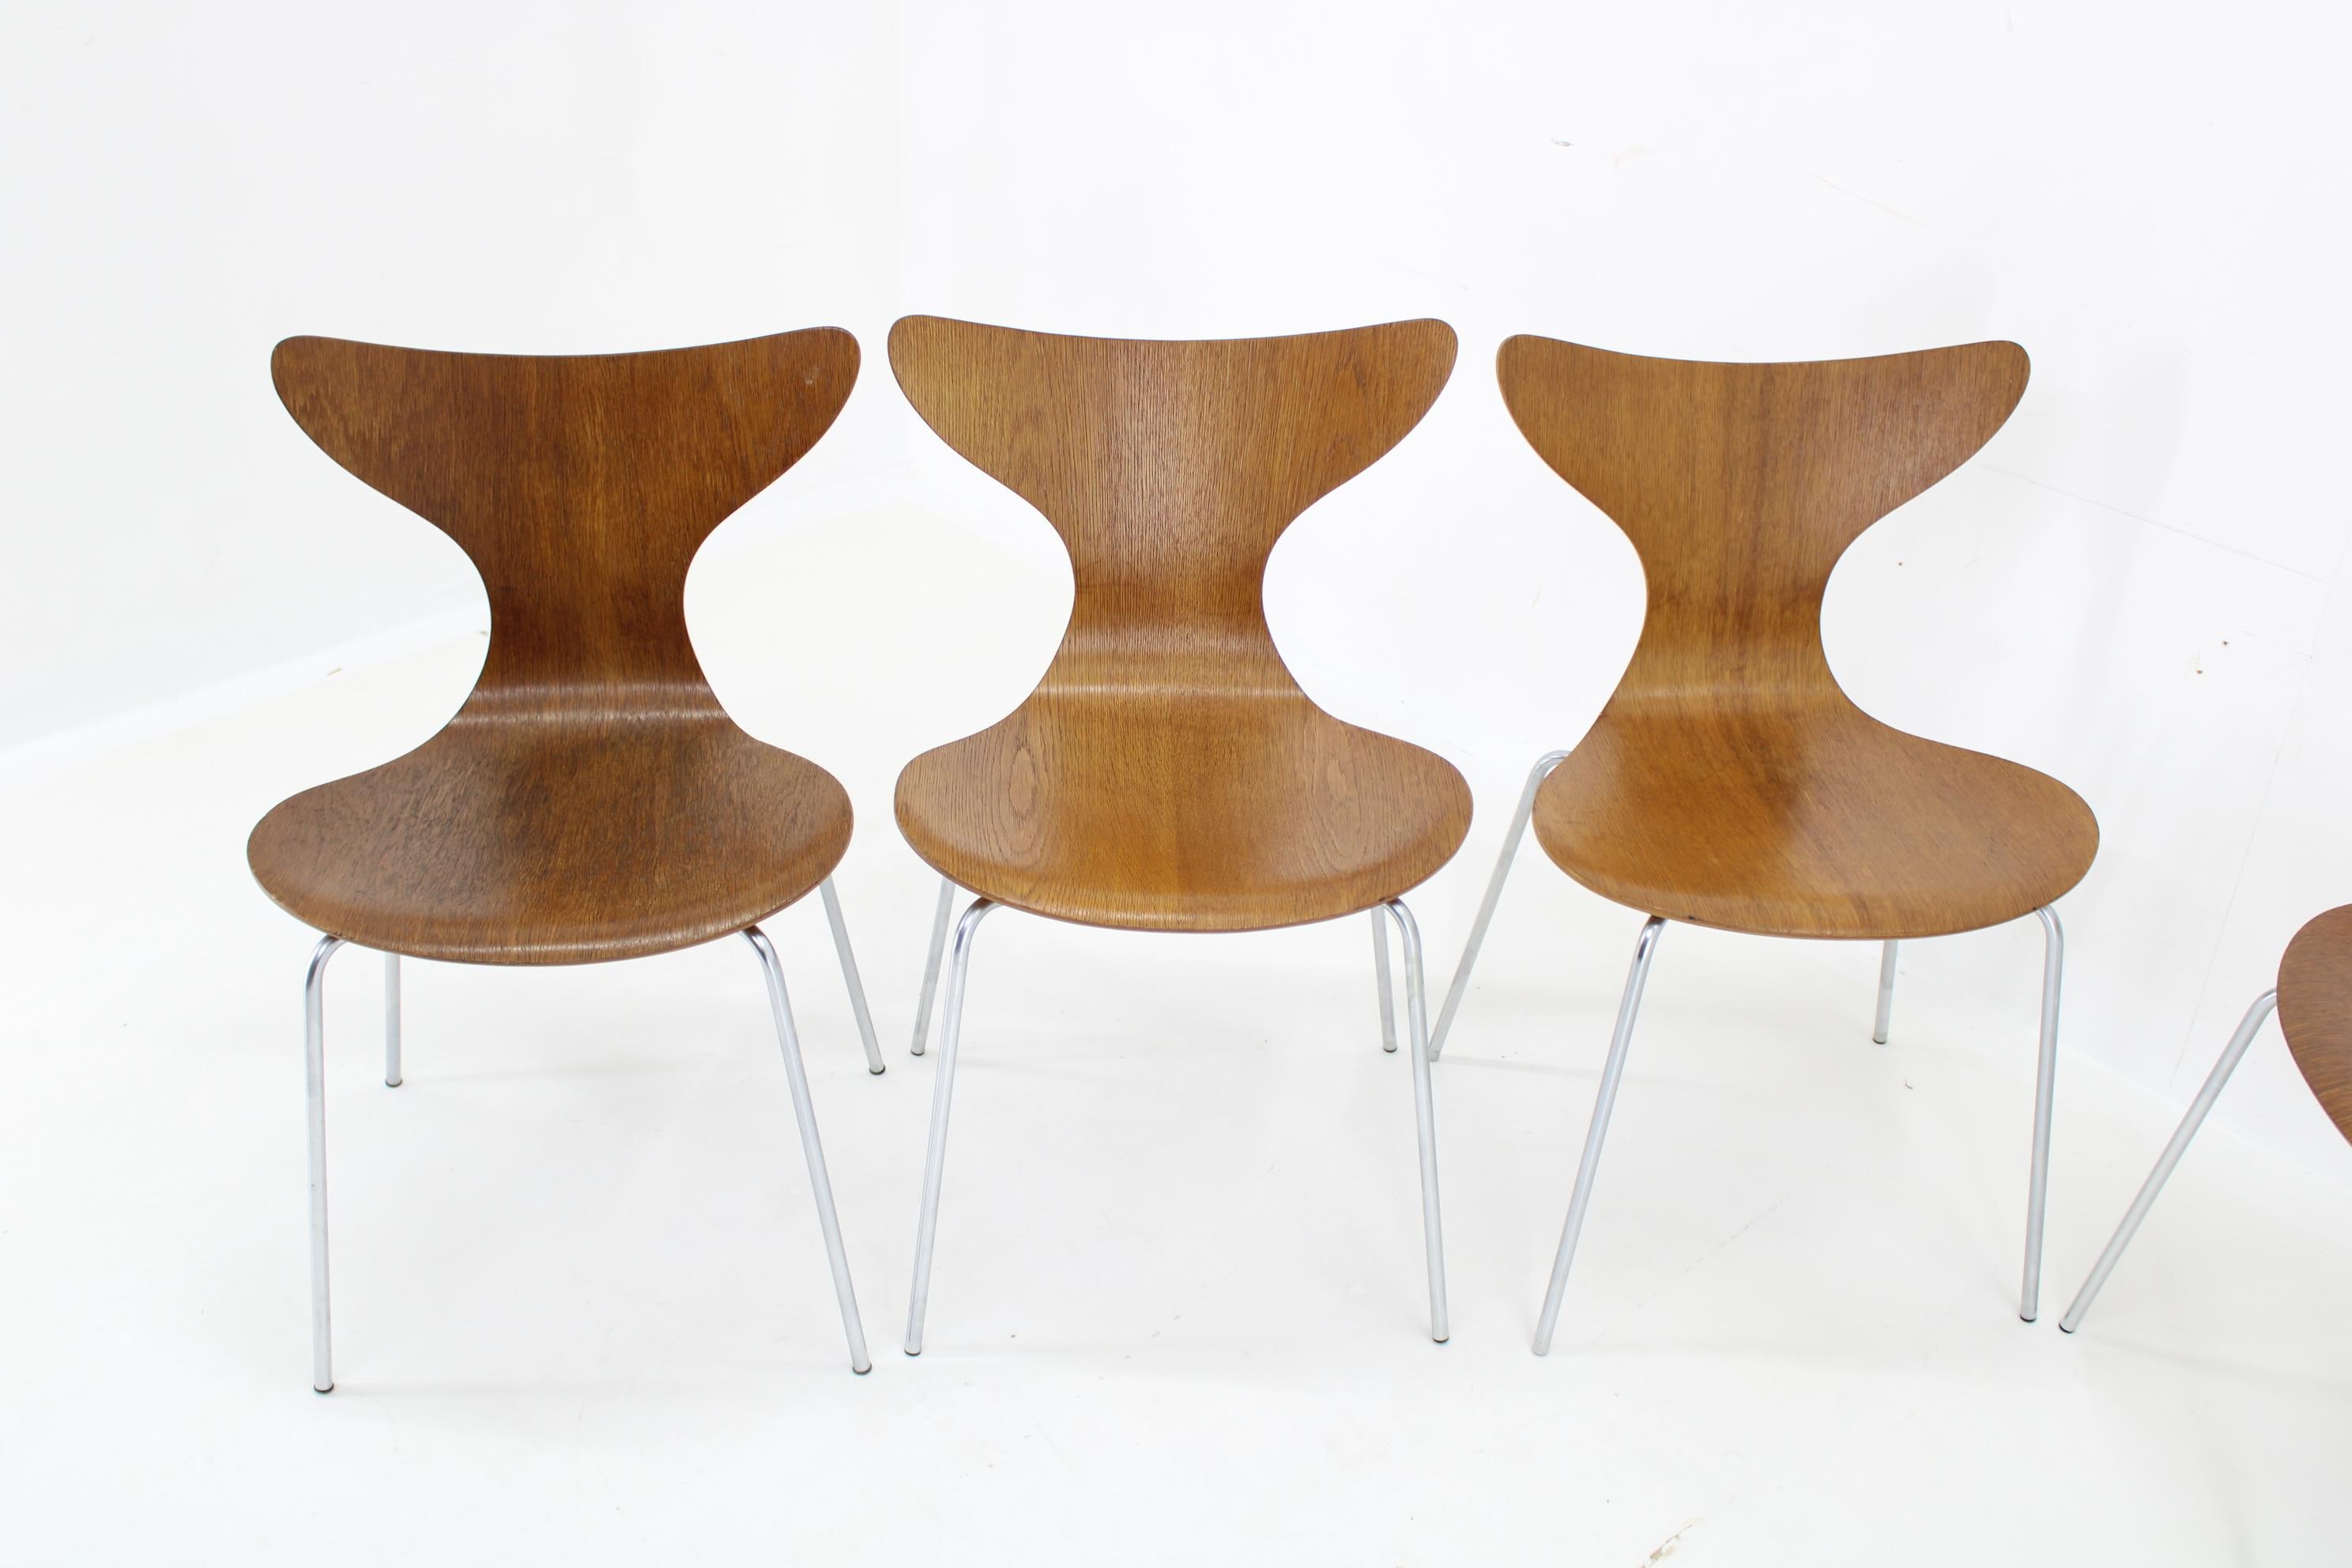 20th Century 1970s Arne Jacobsen Set of Six Lily Chairs in Oak by Fritz Hansen, Denmark For Sale